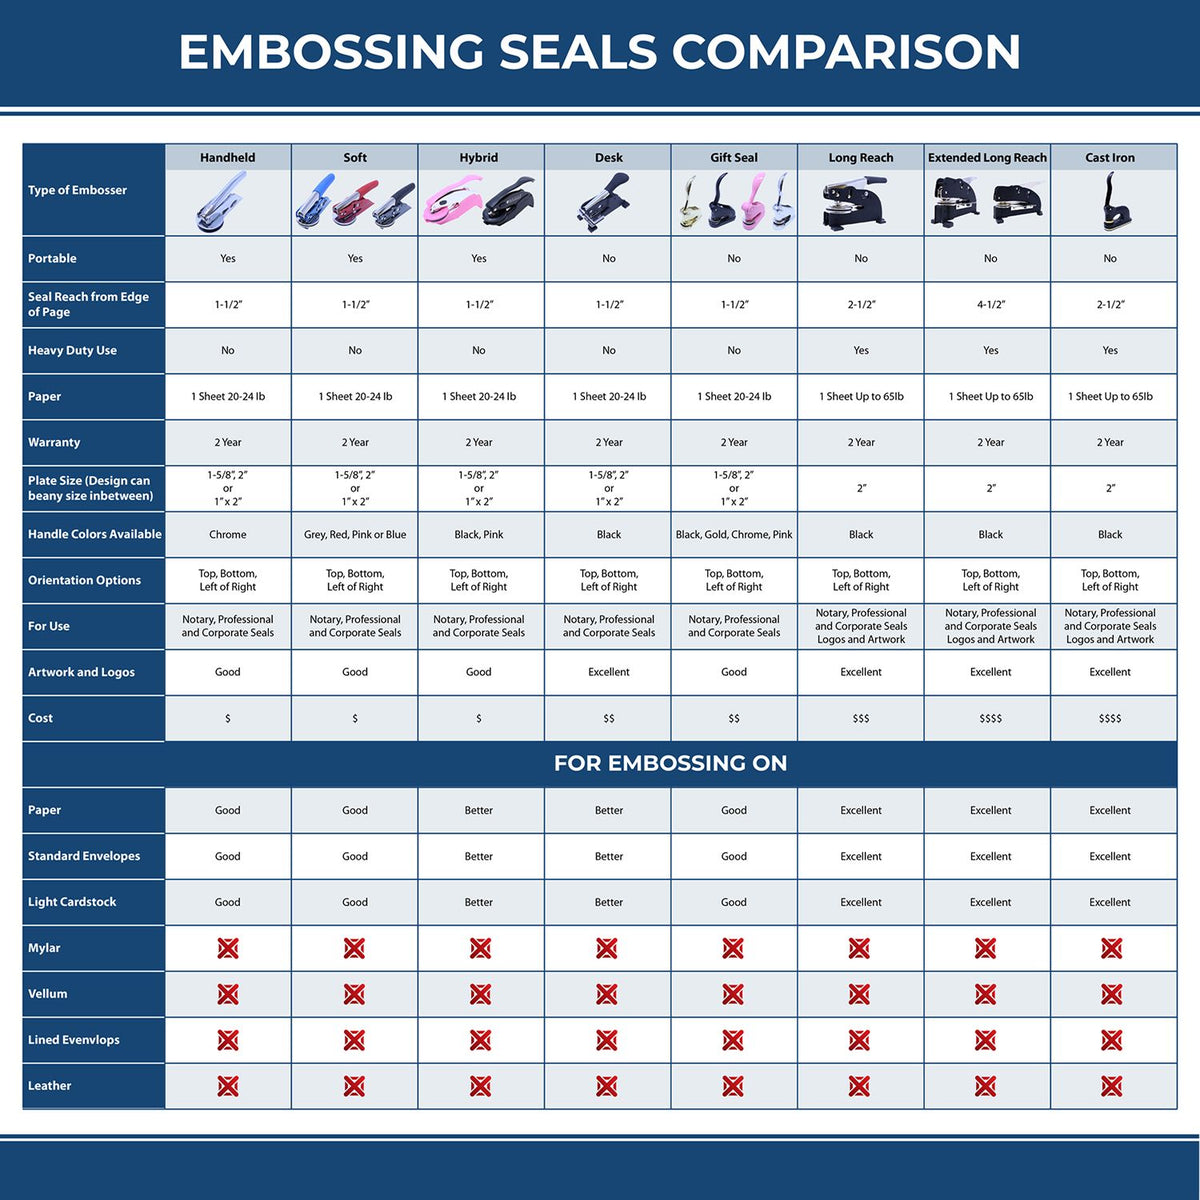 A comparison chart for the different types of mount models available for the Soft Pocket Arkansas Landscape Architect Embosser.